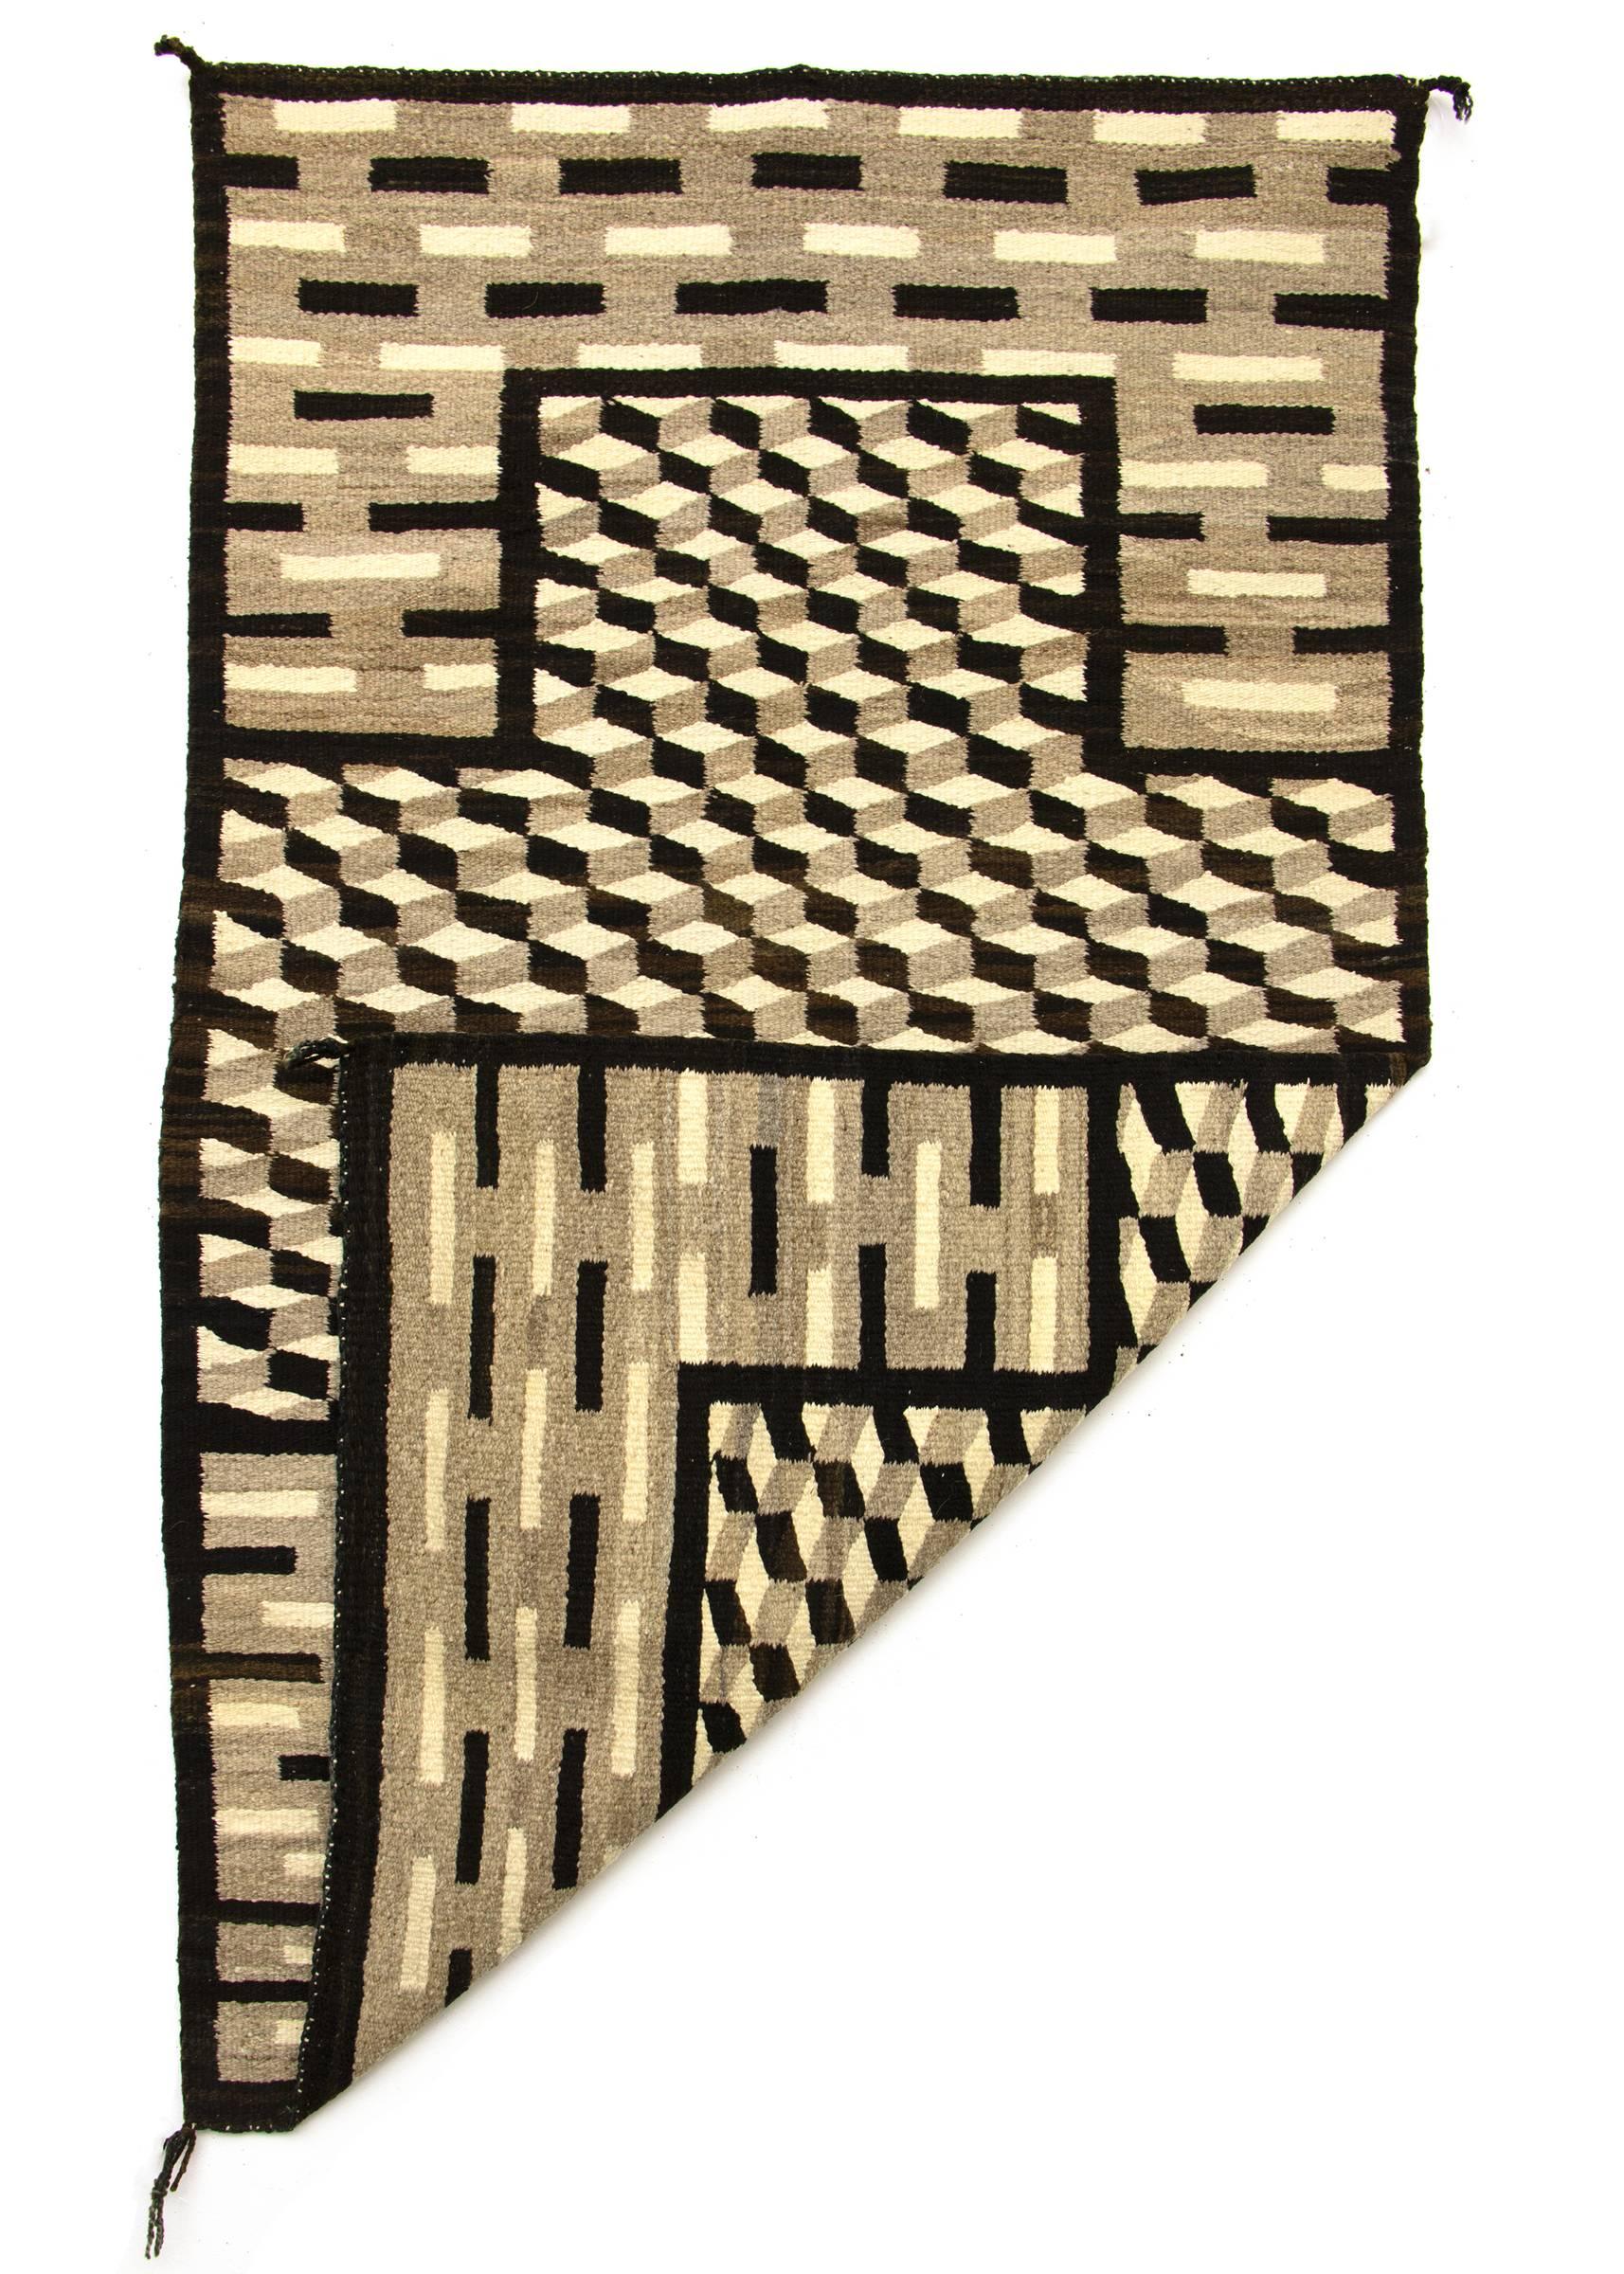 Known as an optical or tumbling block design, this textile has a central cross motif and is woven of native hand spun wool in natural ivory, grey and brown fleece.

This weaving is well suited for use as a wall hanging, area rug or furniture throw.